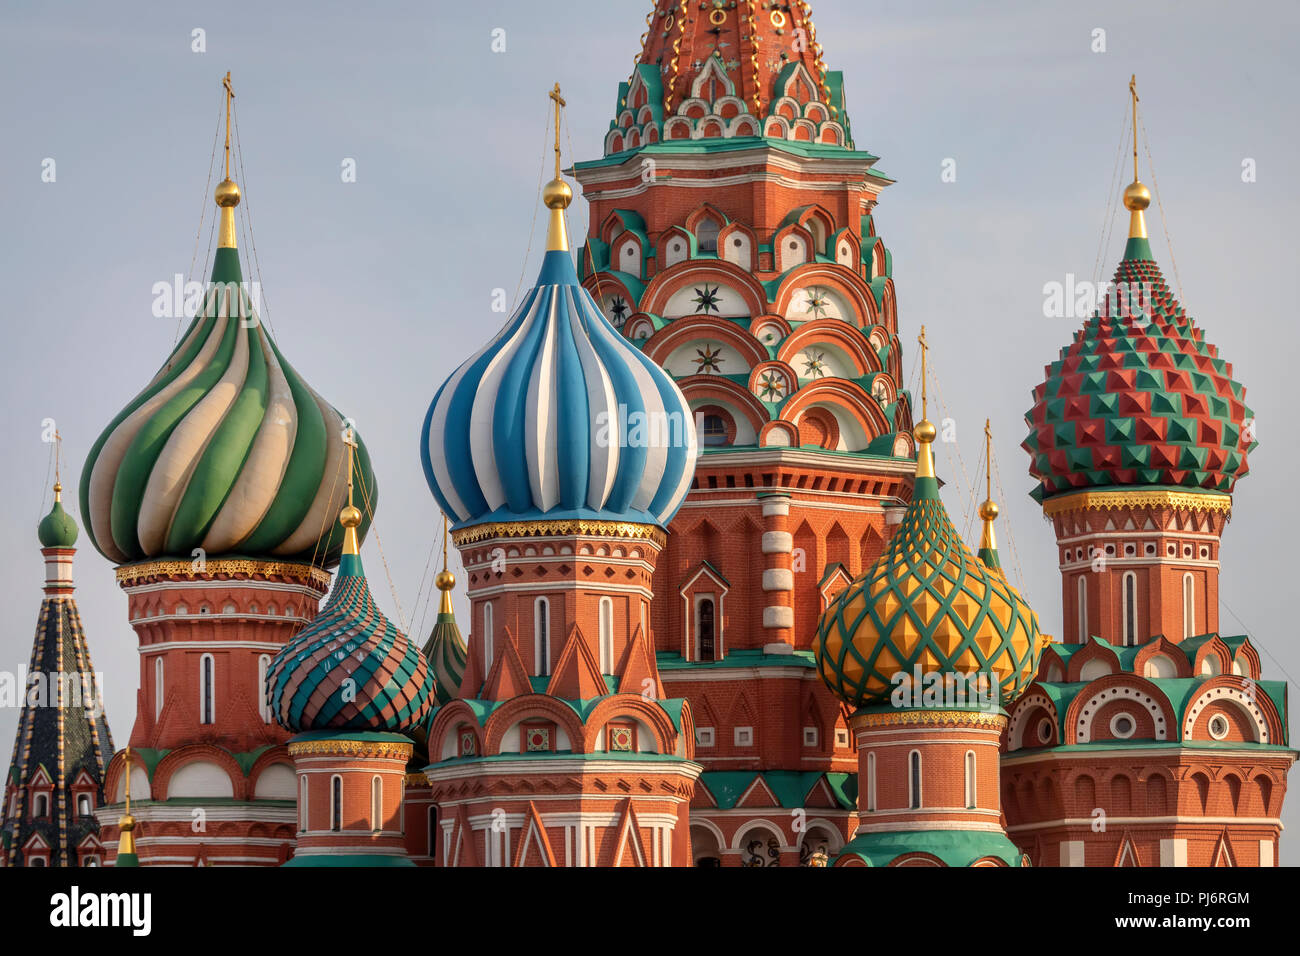 The cupolas of St. Basil's Cathedral on the Red Square in the center of Moscow, Russia Stock Photo